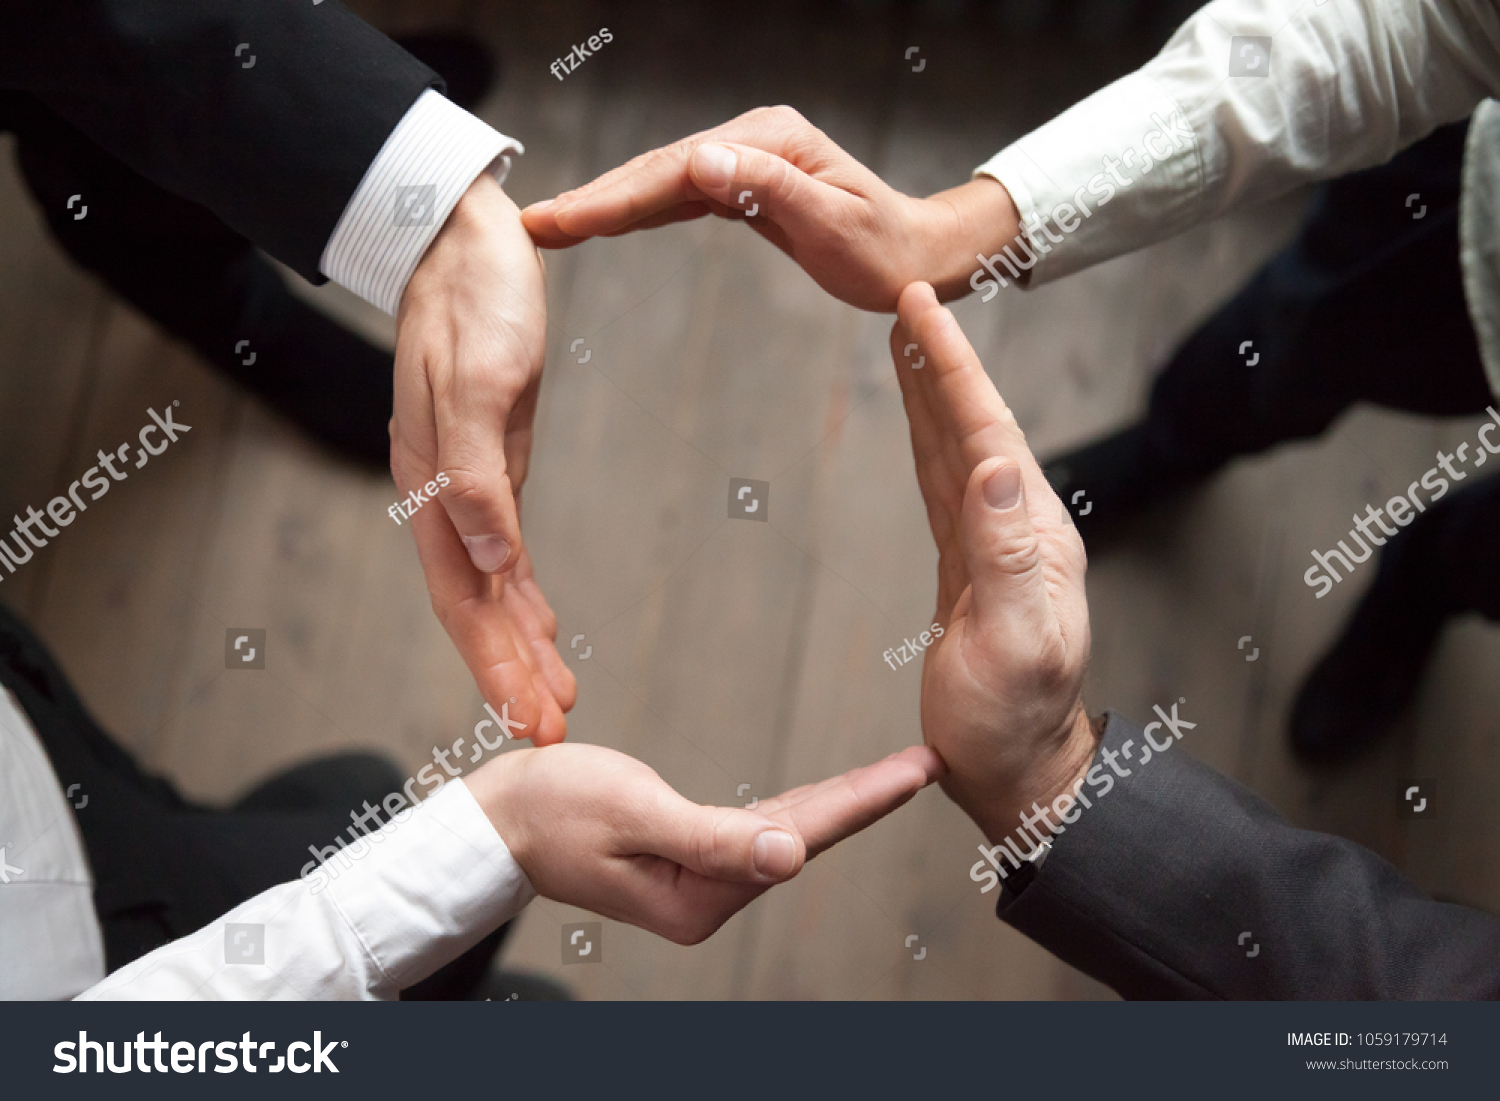 Business team people join hands forming circle, business protection, unity in care and support, shared corporate responsibility, help in teamwork, synergy trust safety concept, close up top view #1059179714